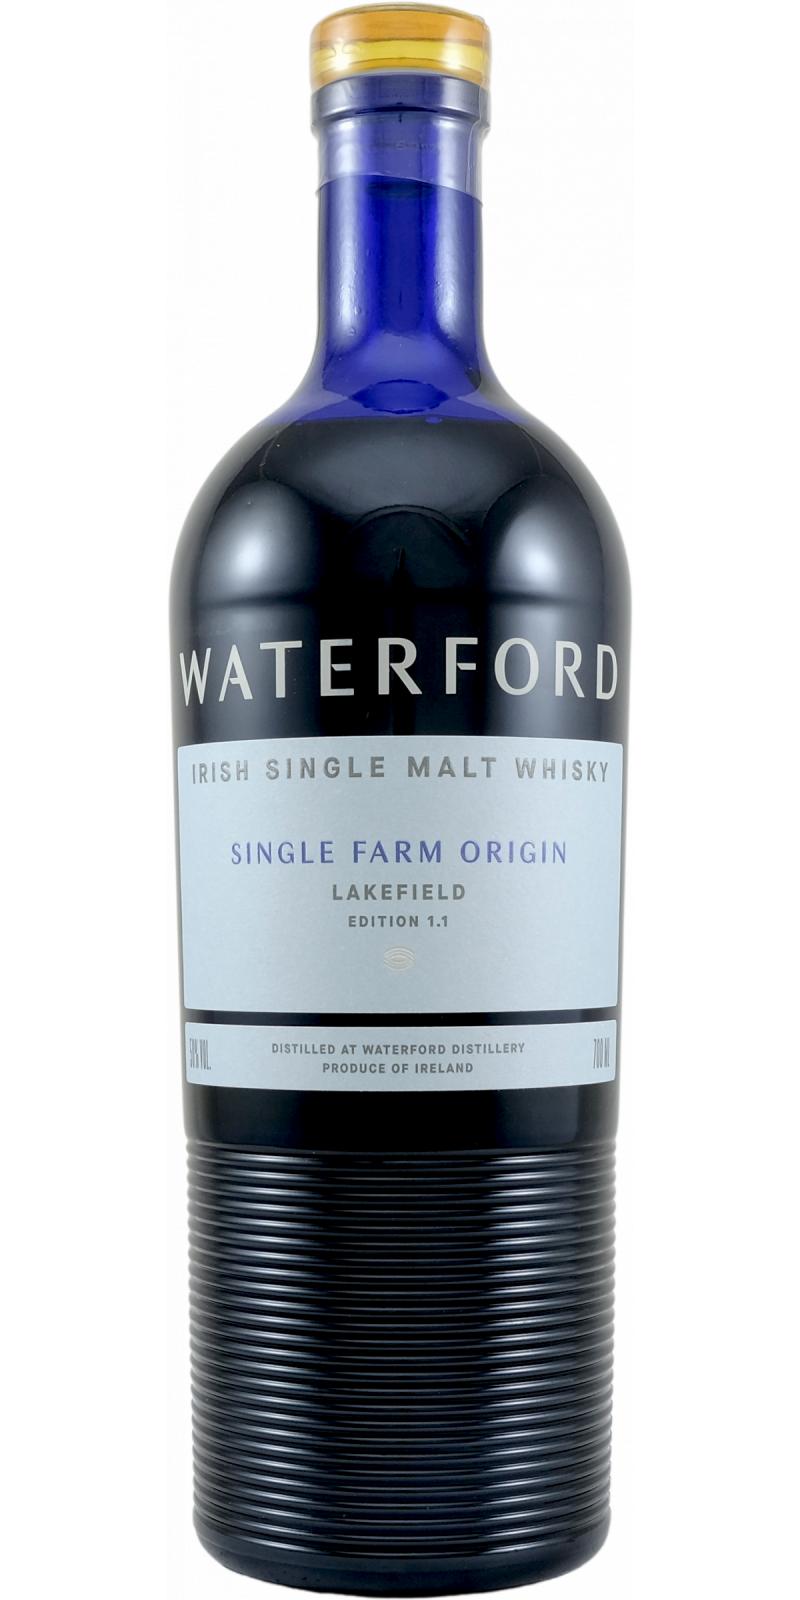 Waterford Lakefield: Edition 1.1